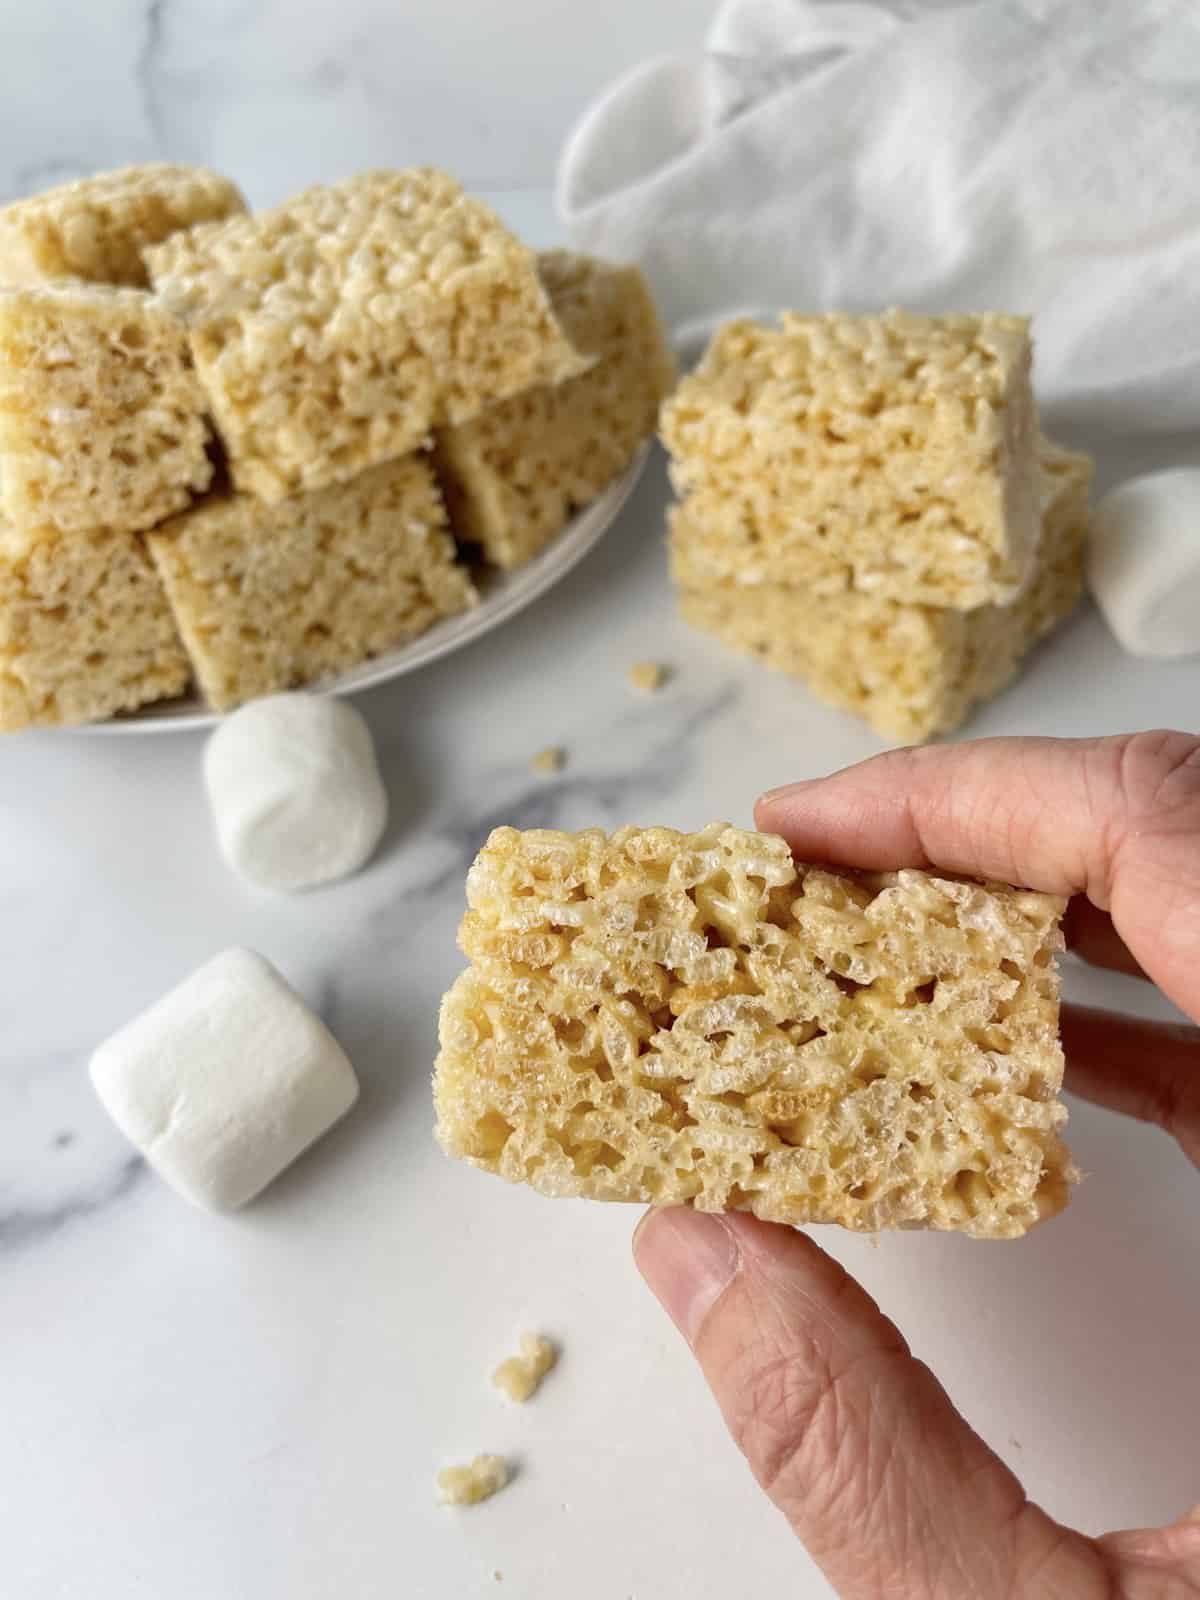 Hand holding a rice krispie treat square to show how thick it is.